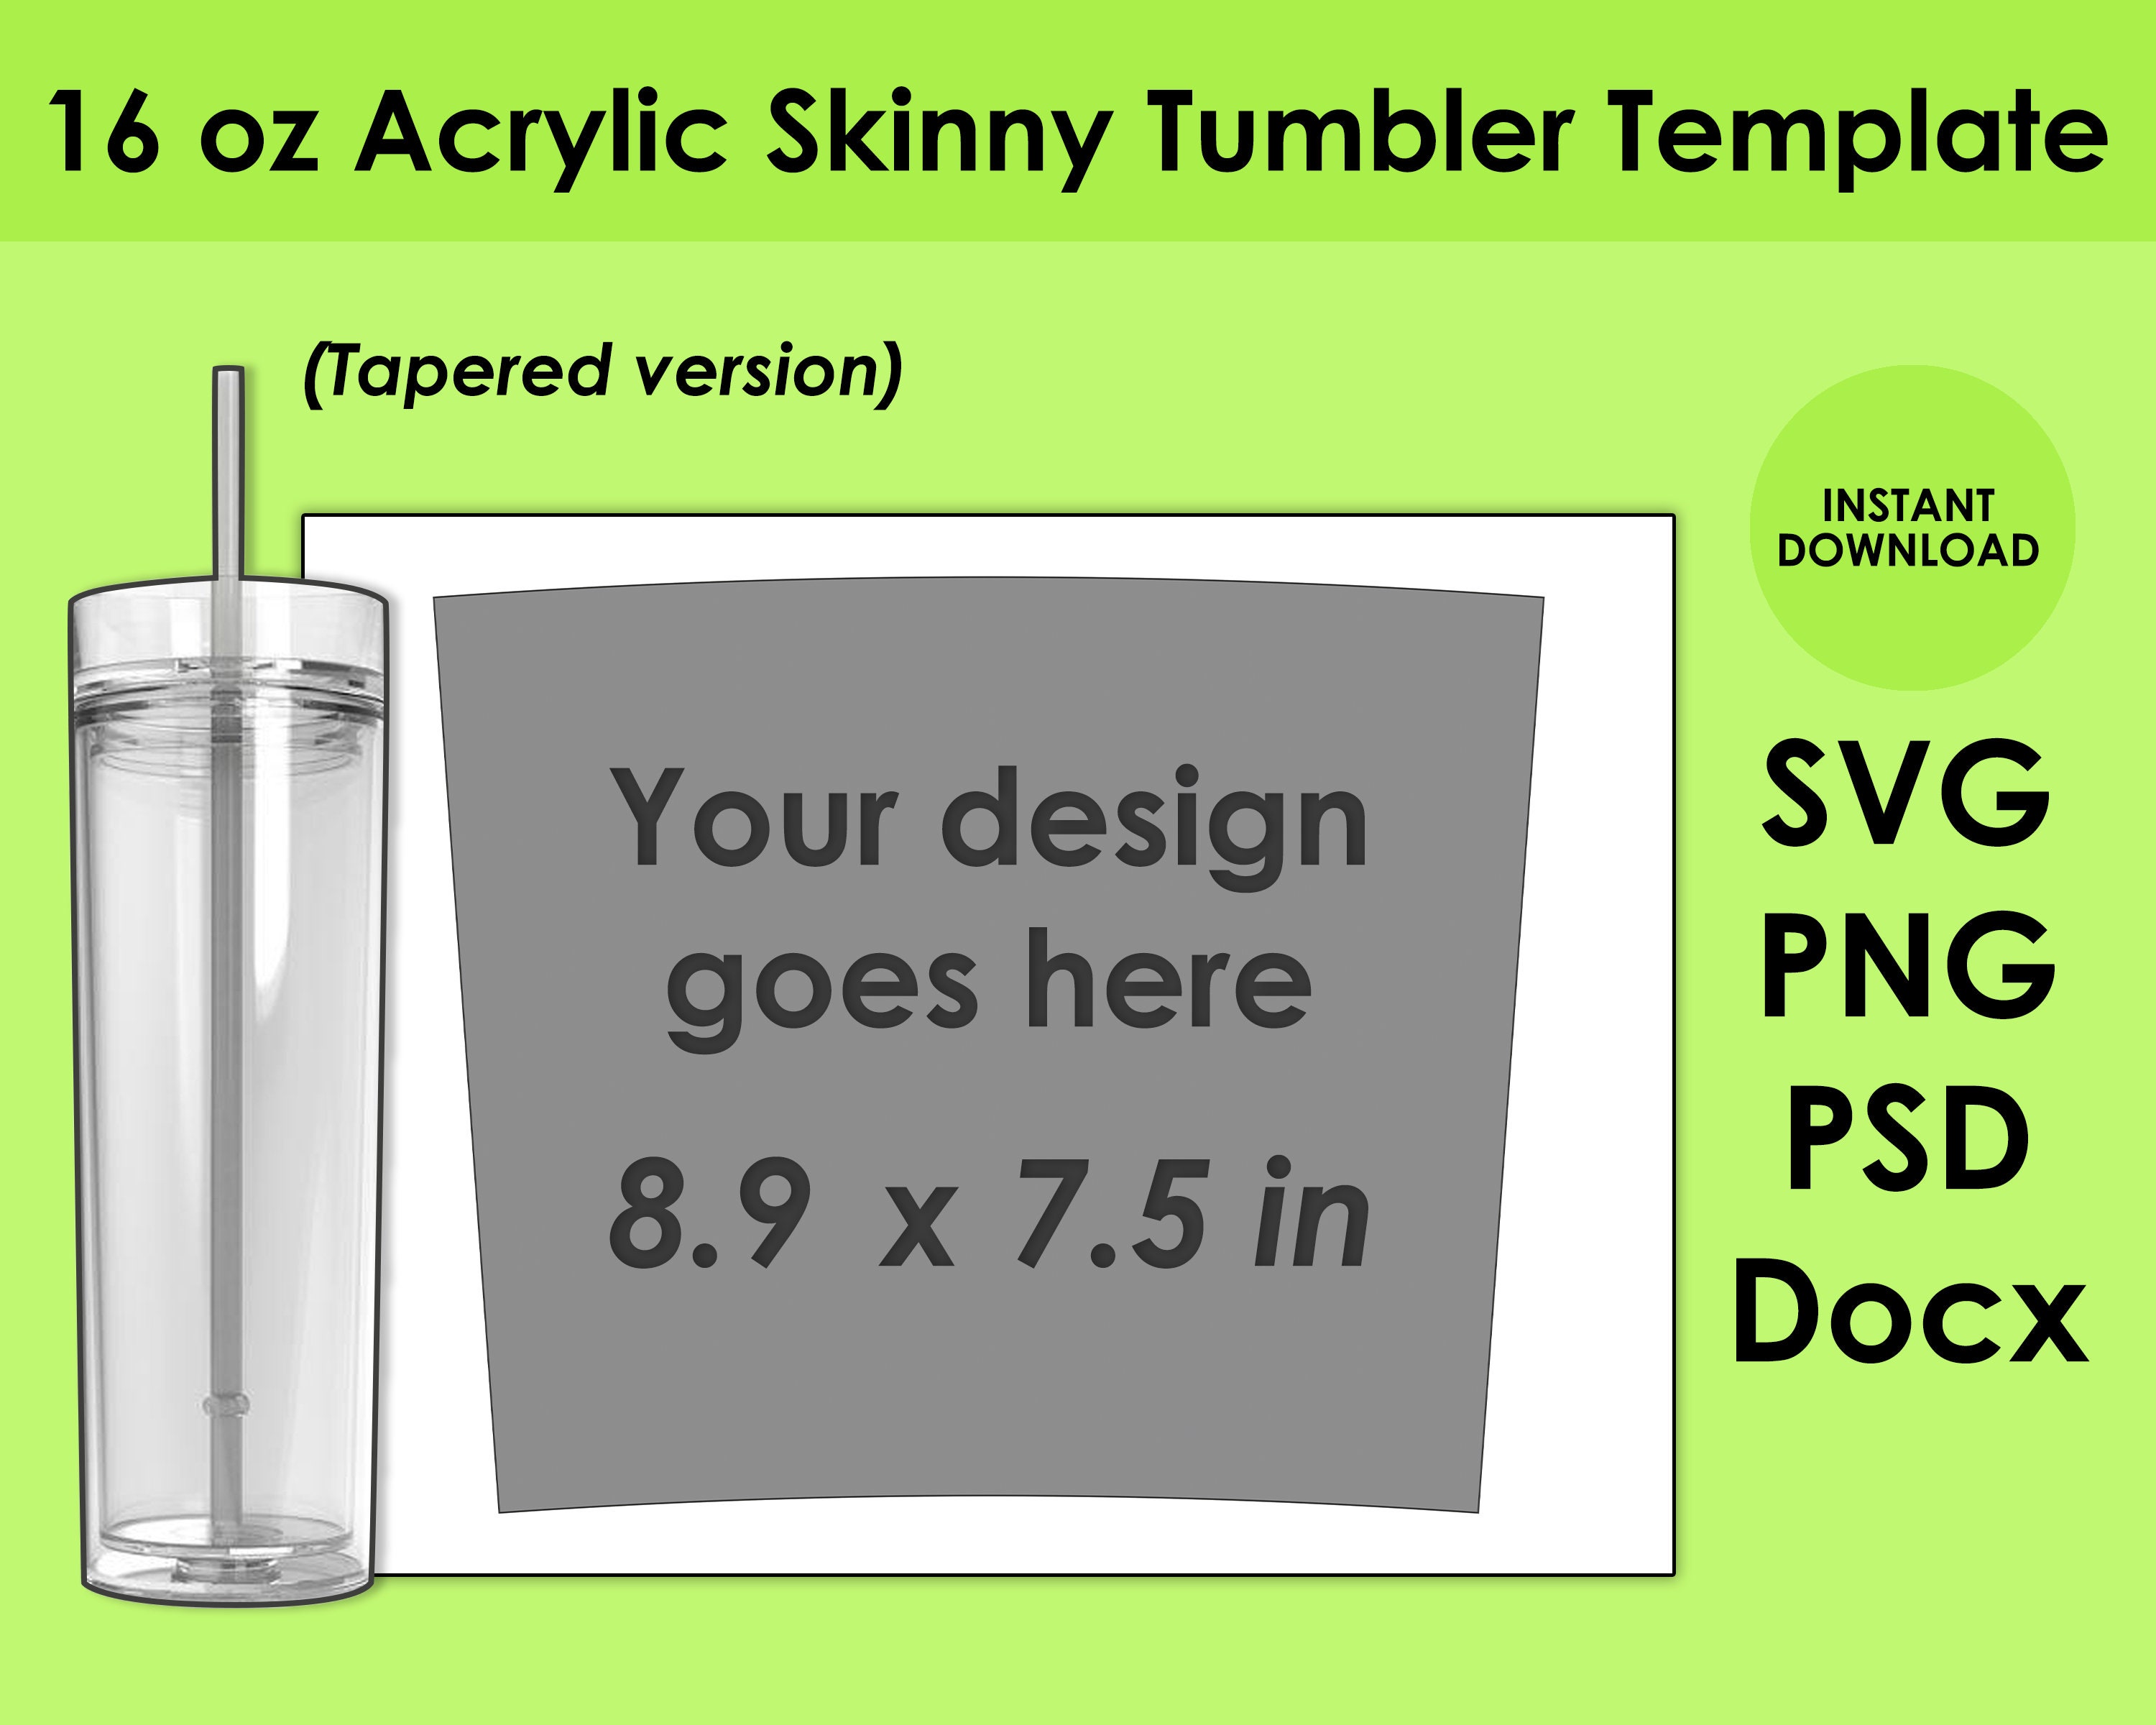 16oz Acrylic Skinny Tumbler Template SVG, PNG, PSD and Docx 